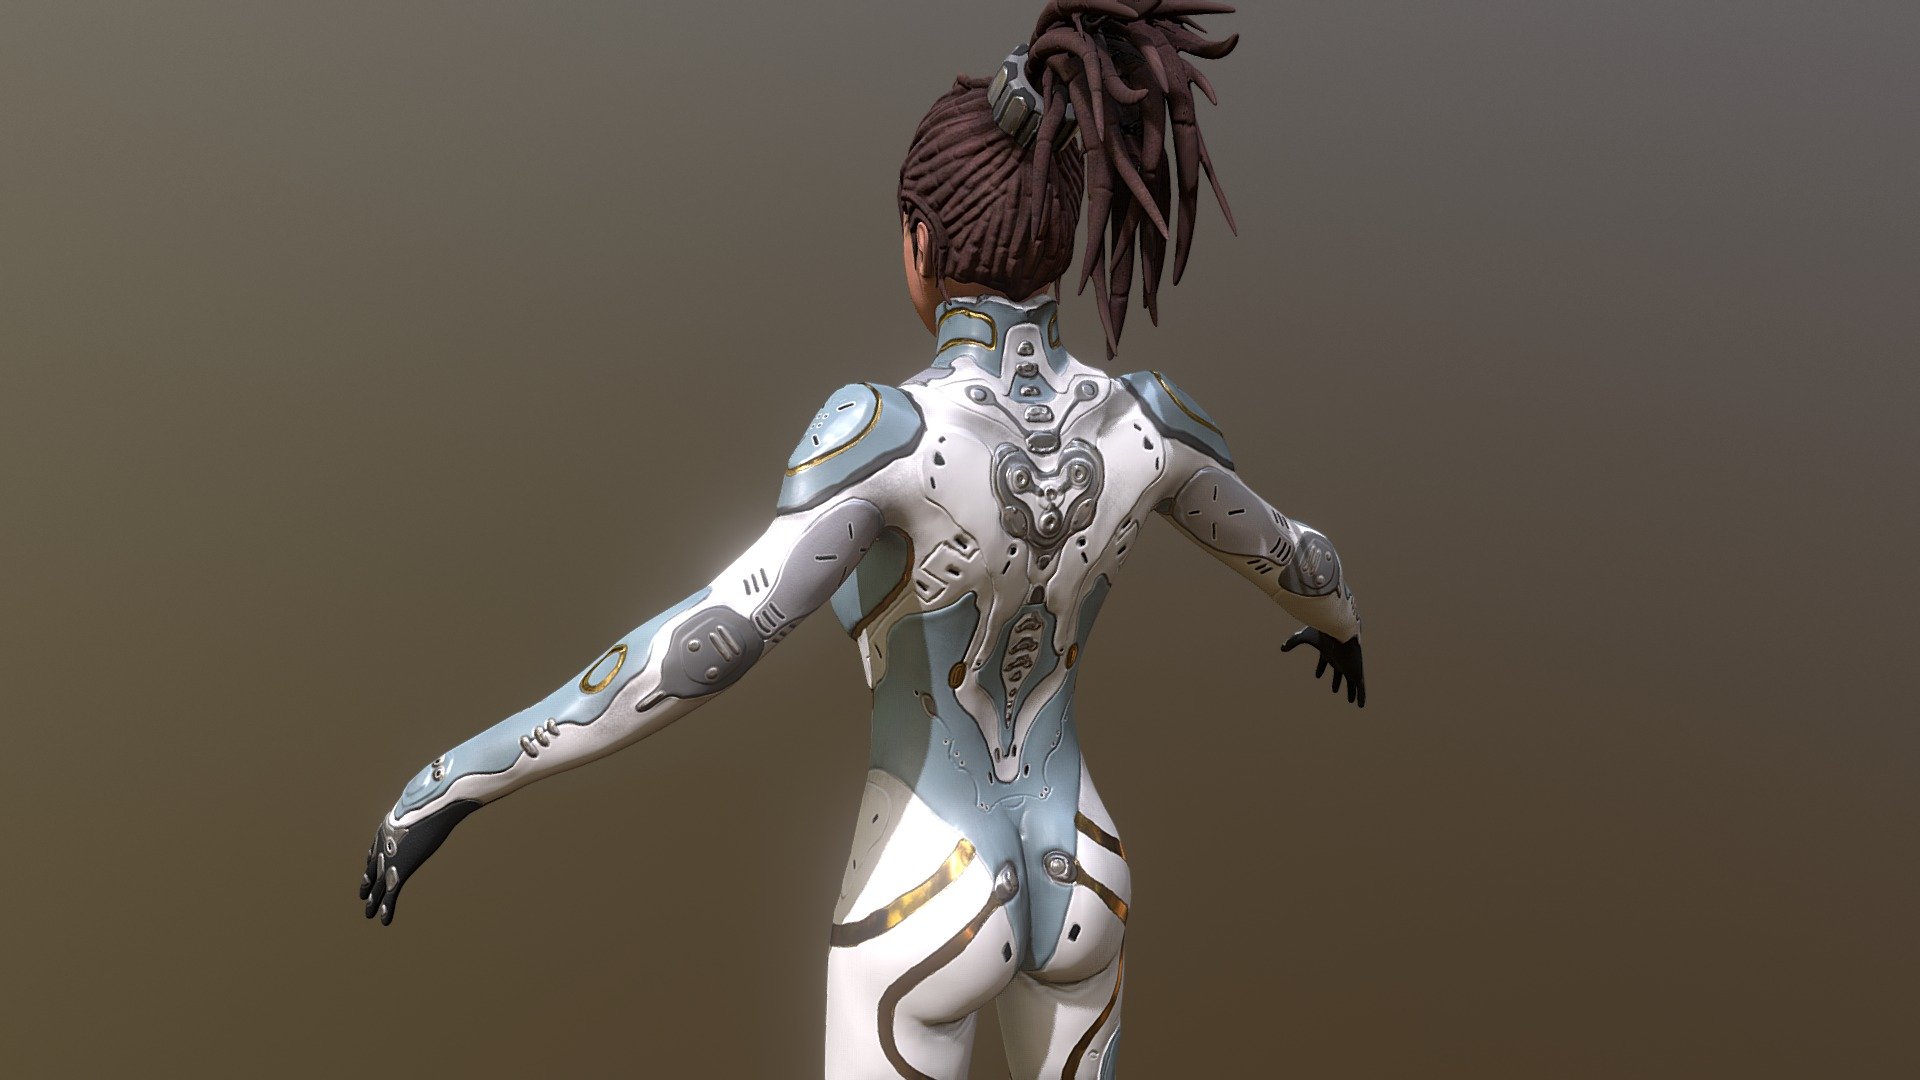 Female character of the game StarCraft, all the detail sculpted in zbrush, the retopology is made with topogun, the uvs are made in 3dmax, the bake is made in topogun, the diffuse of the face is painted in zbrush and the diffuse of the body and the other maps in photoshop, the rig is ready to animate.
I hope you like it !!!

Personaje femenino del juego StarCraft , todo el detalle esculpido en zbrush , la retopologia está hecha con topogun , las uvs están hechas en 3dmax , el bake está hecho en topogun , el difuse de la cara está pintado en zbrush y el difuse del cuerpo y los otros mapas en photoshop, está hecho el rig listo para animar .
Espero que os guste !!! - Sarah Kerrigan - StarCraft - Buy Royalty Free 3D model by ericpr23 3d model